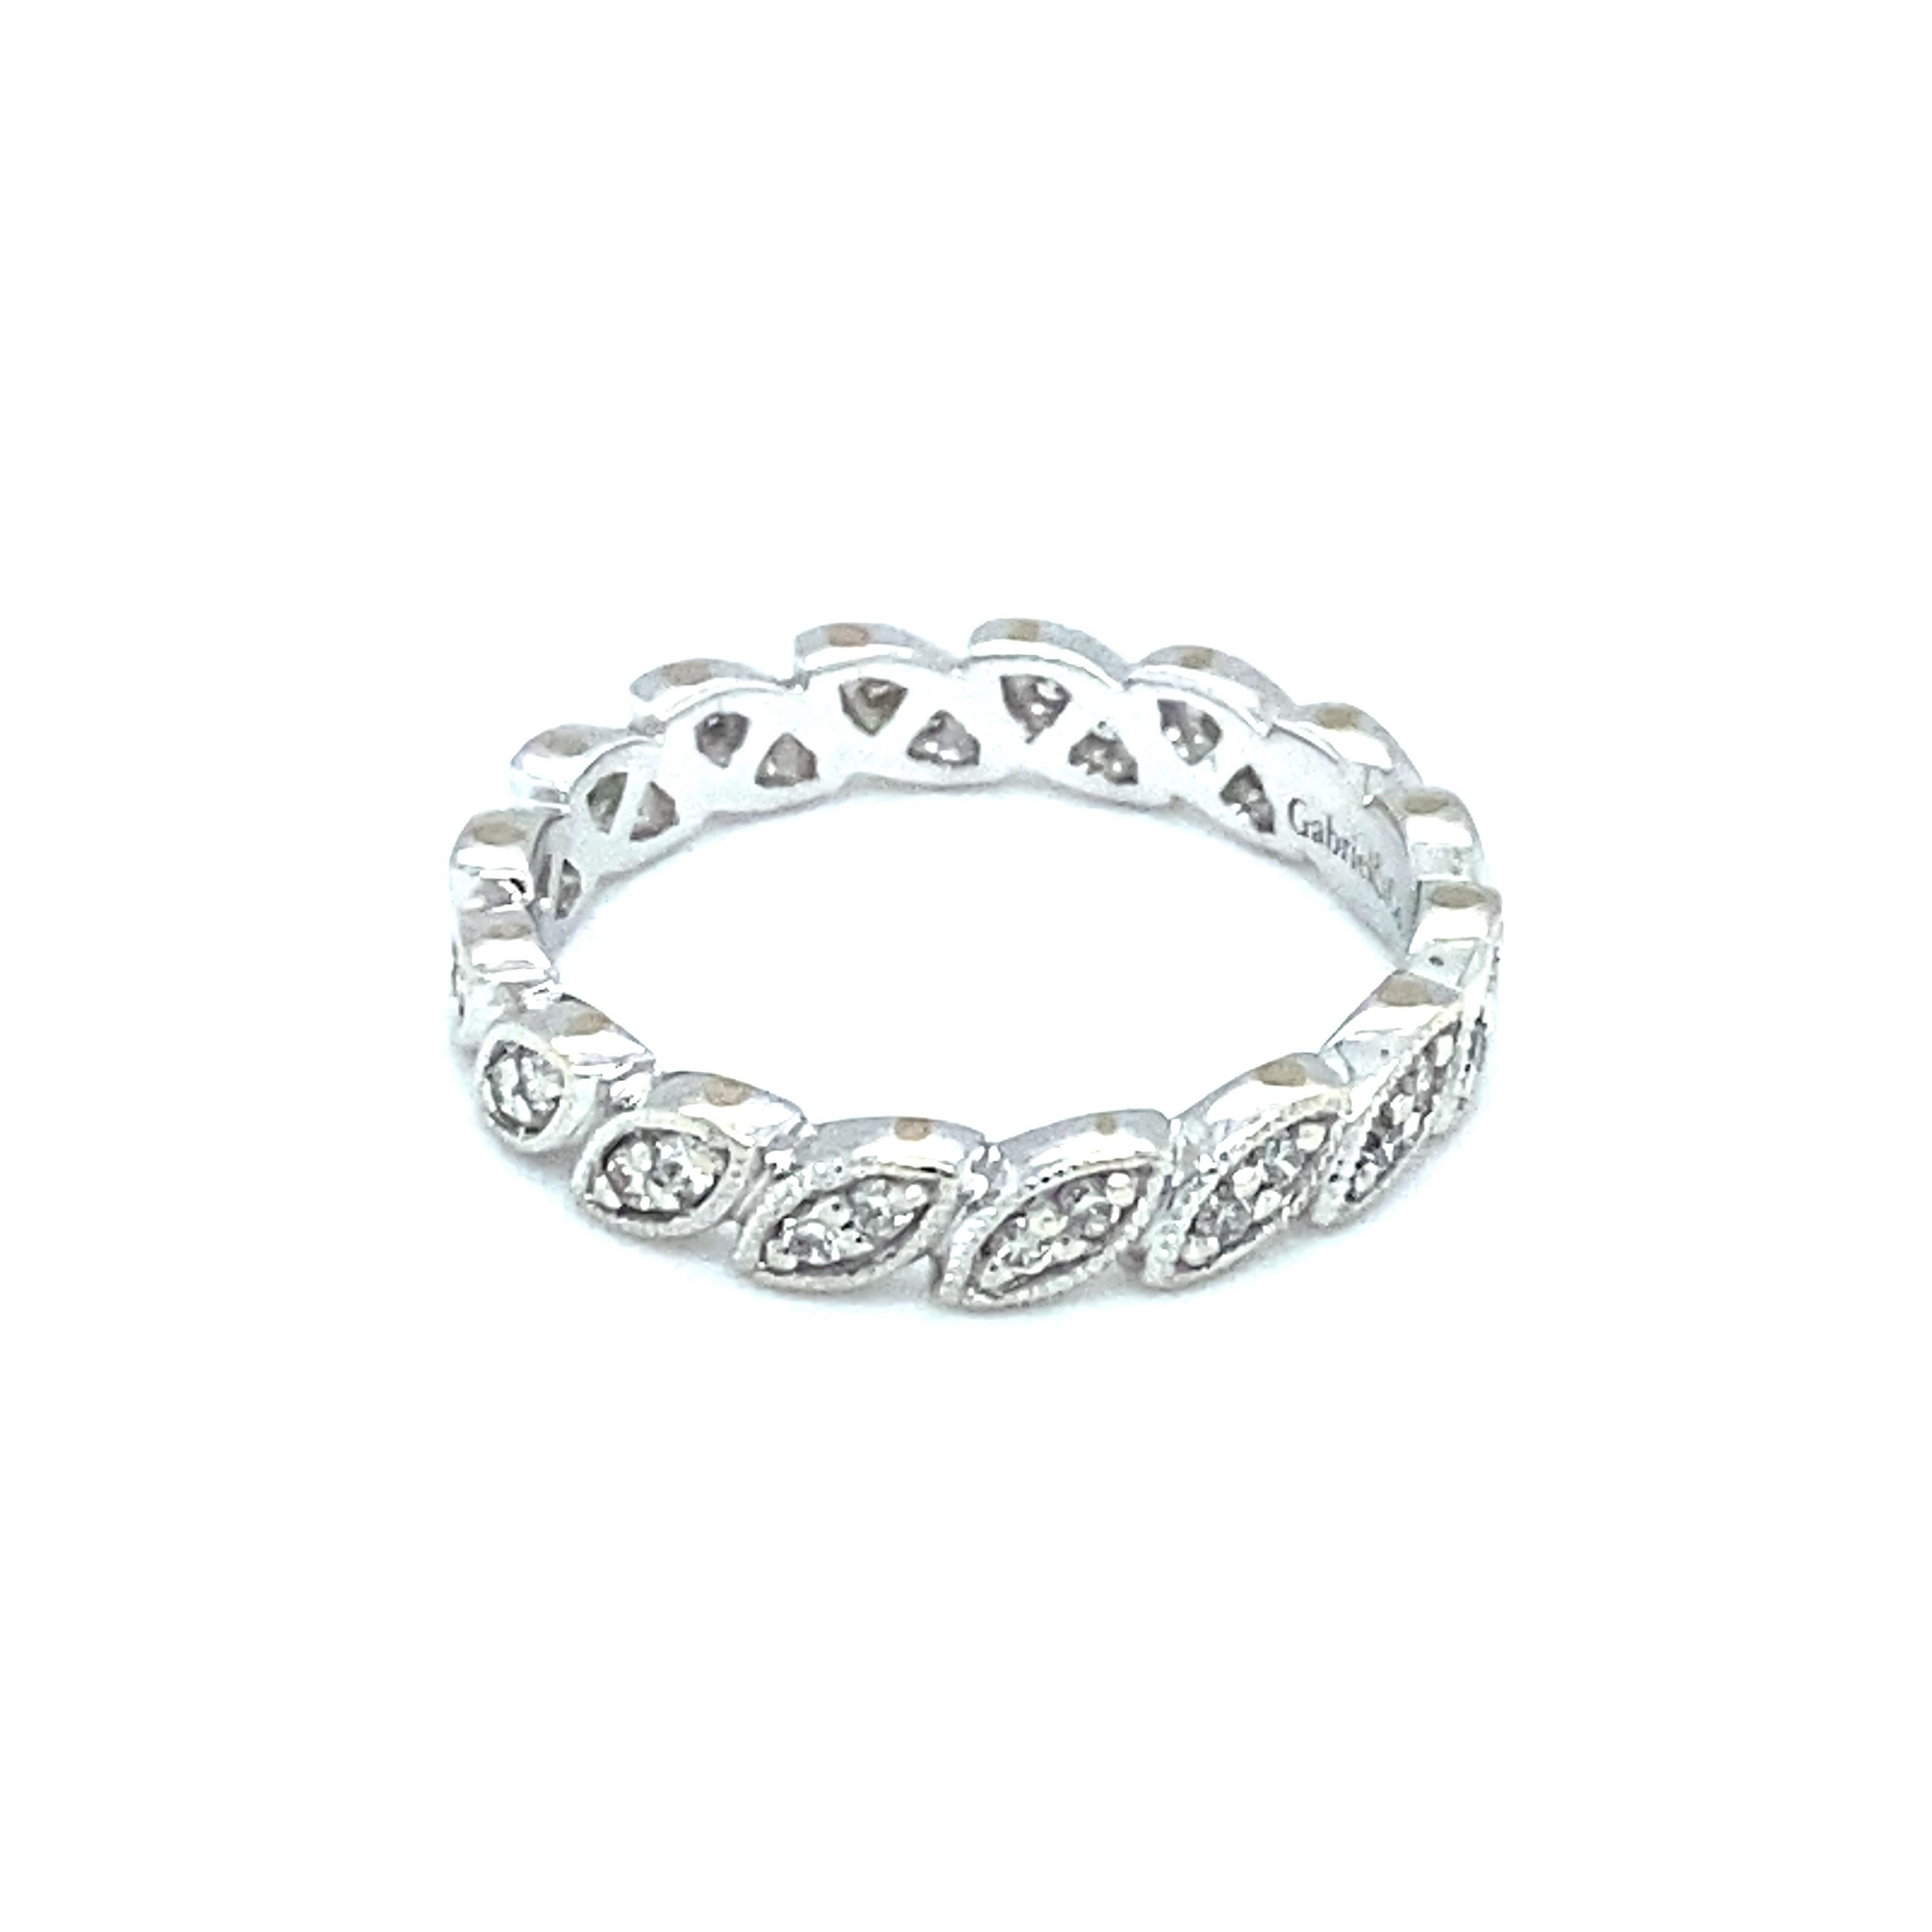 Item Details: This petite ring by Gabriel & Co. features a marquise shape eternity band with round diamonds, all prong set and an empty space for slight resizing (1-2 sizes) if needed.

Circa: 2000s
Metal Type: 14 Karat White Gold
Weight: 2.0